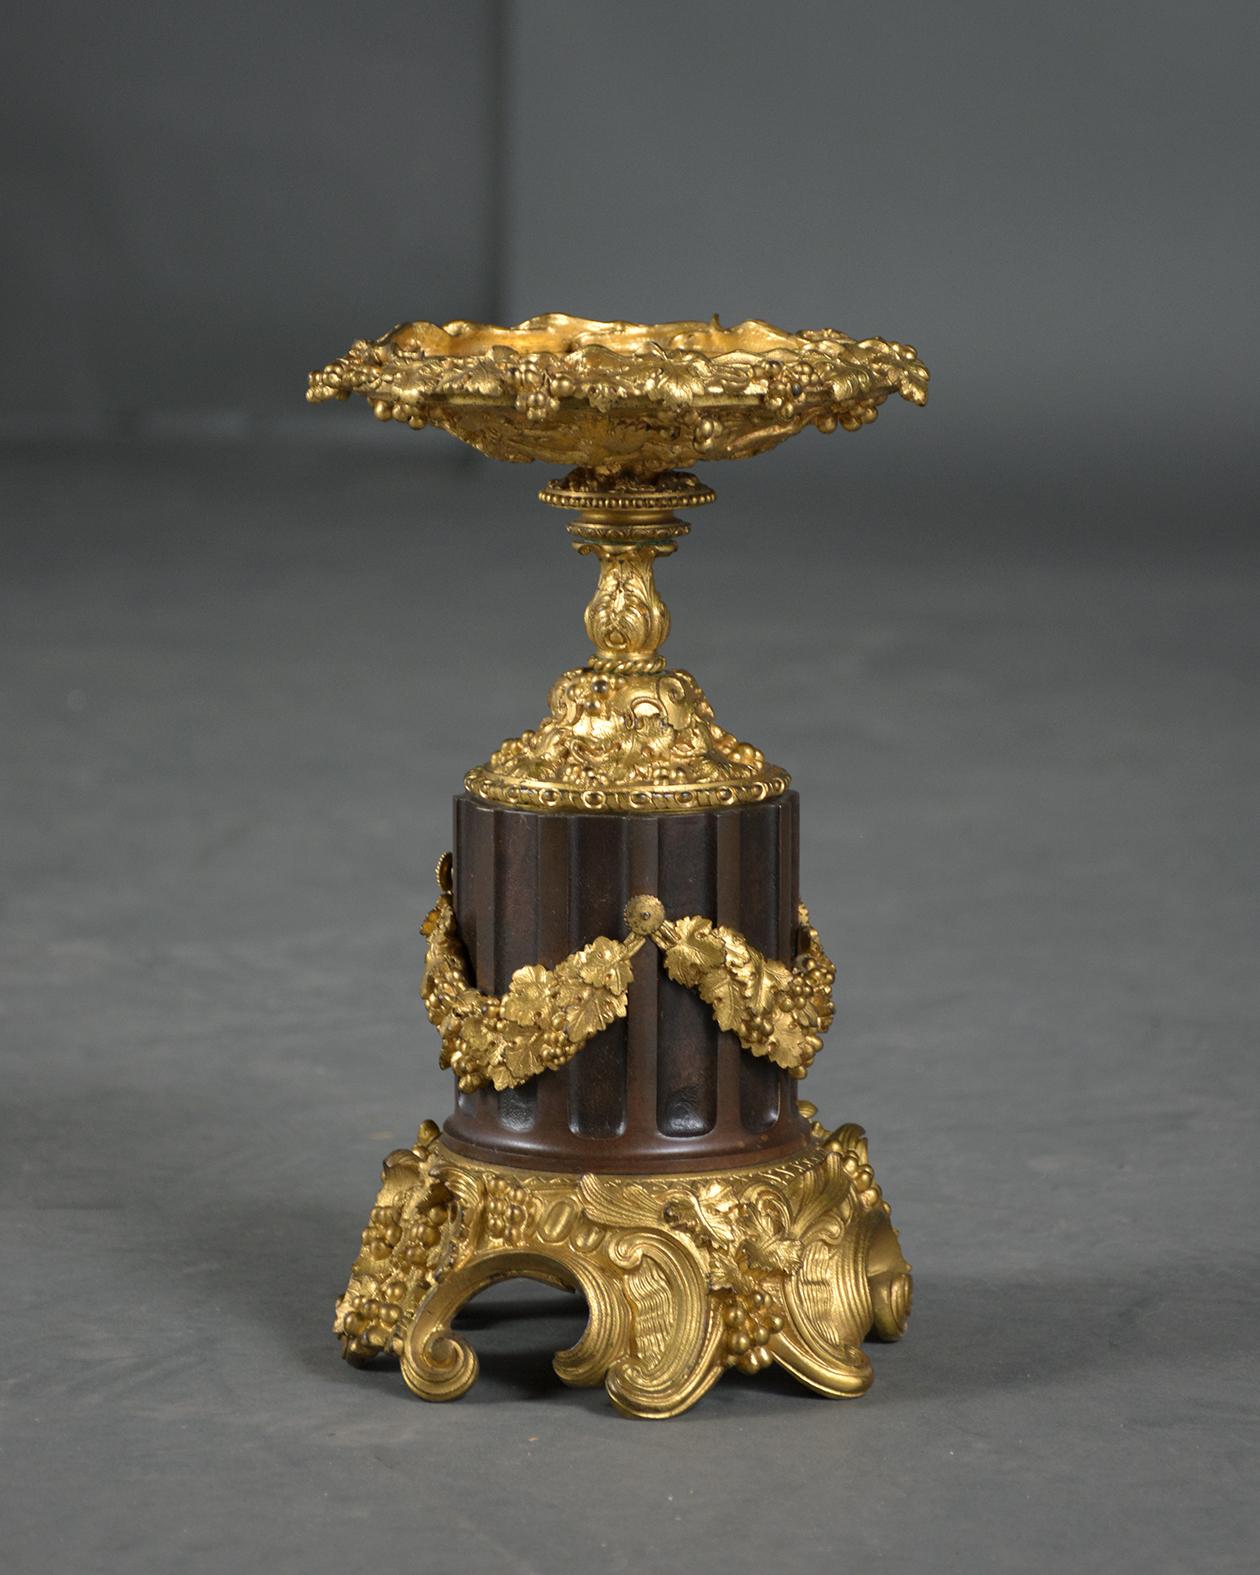 Early 19th-Century French Bronzed Urns with Gold-Plated Garland Decoration For Sale 3